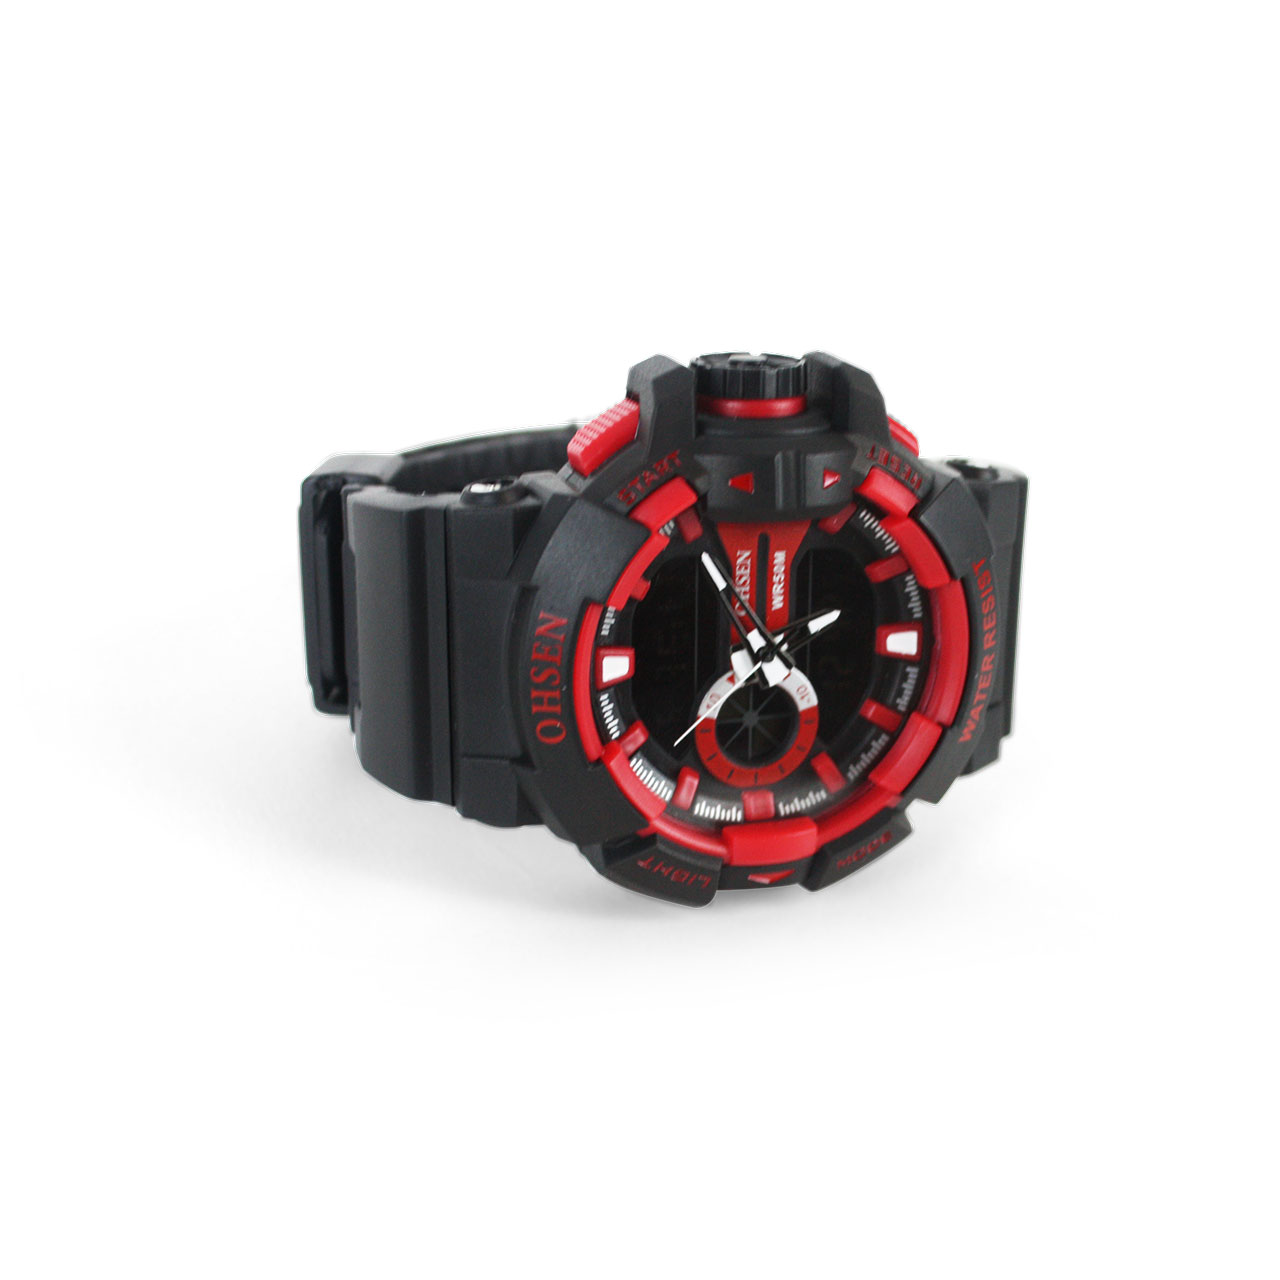 Ultra-Durable Ohsen 50M Water Resistant Mens Red And Black Watch